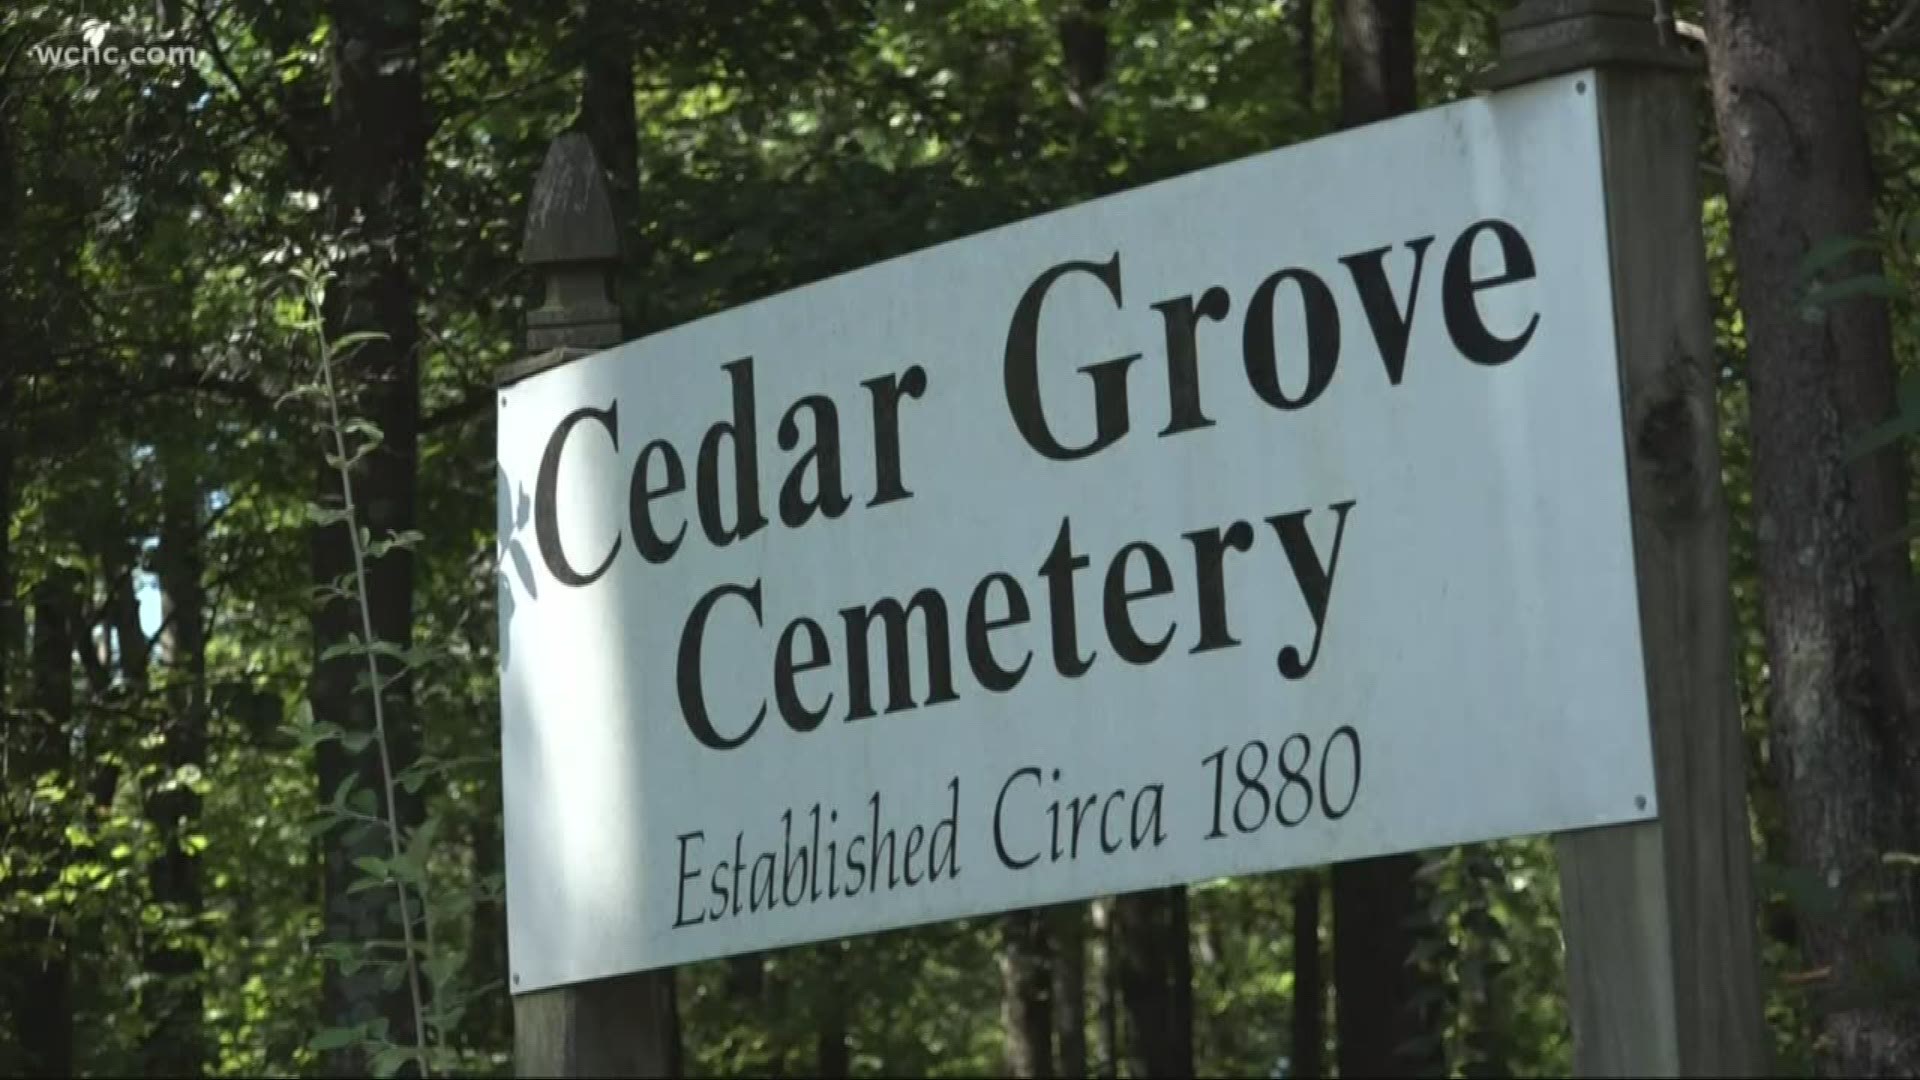 Cedar Grove cemetery has been neglected for so long that weeds are grown over tombstones that are centuries old.